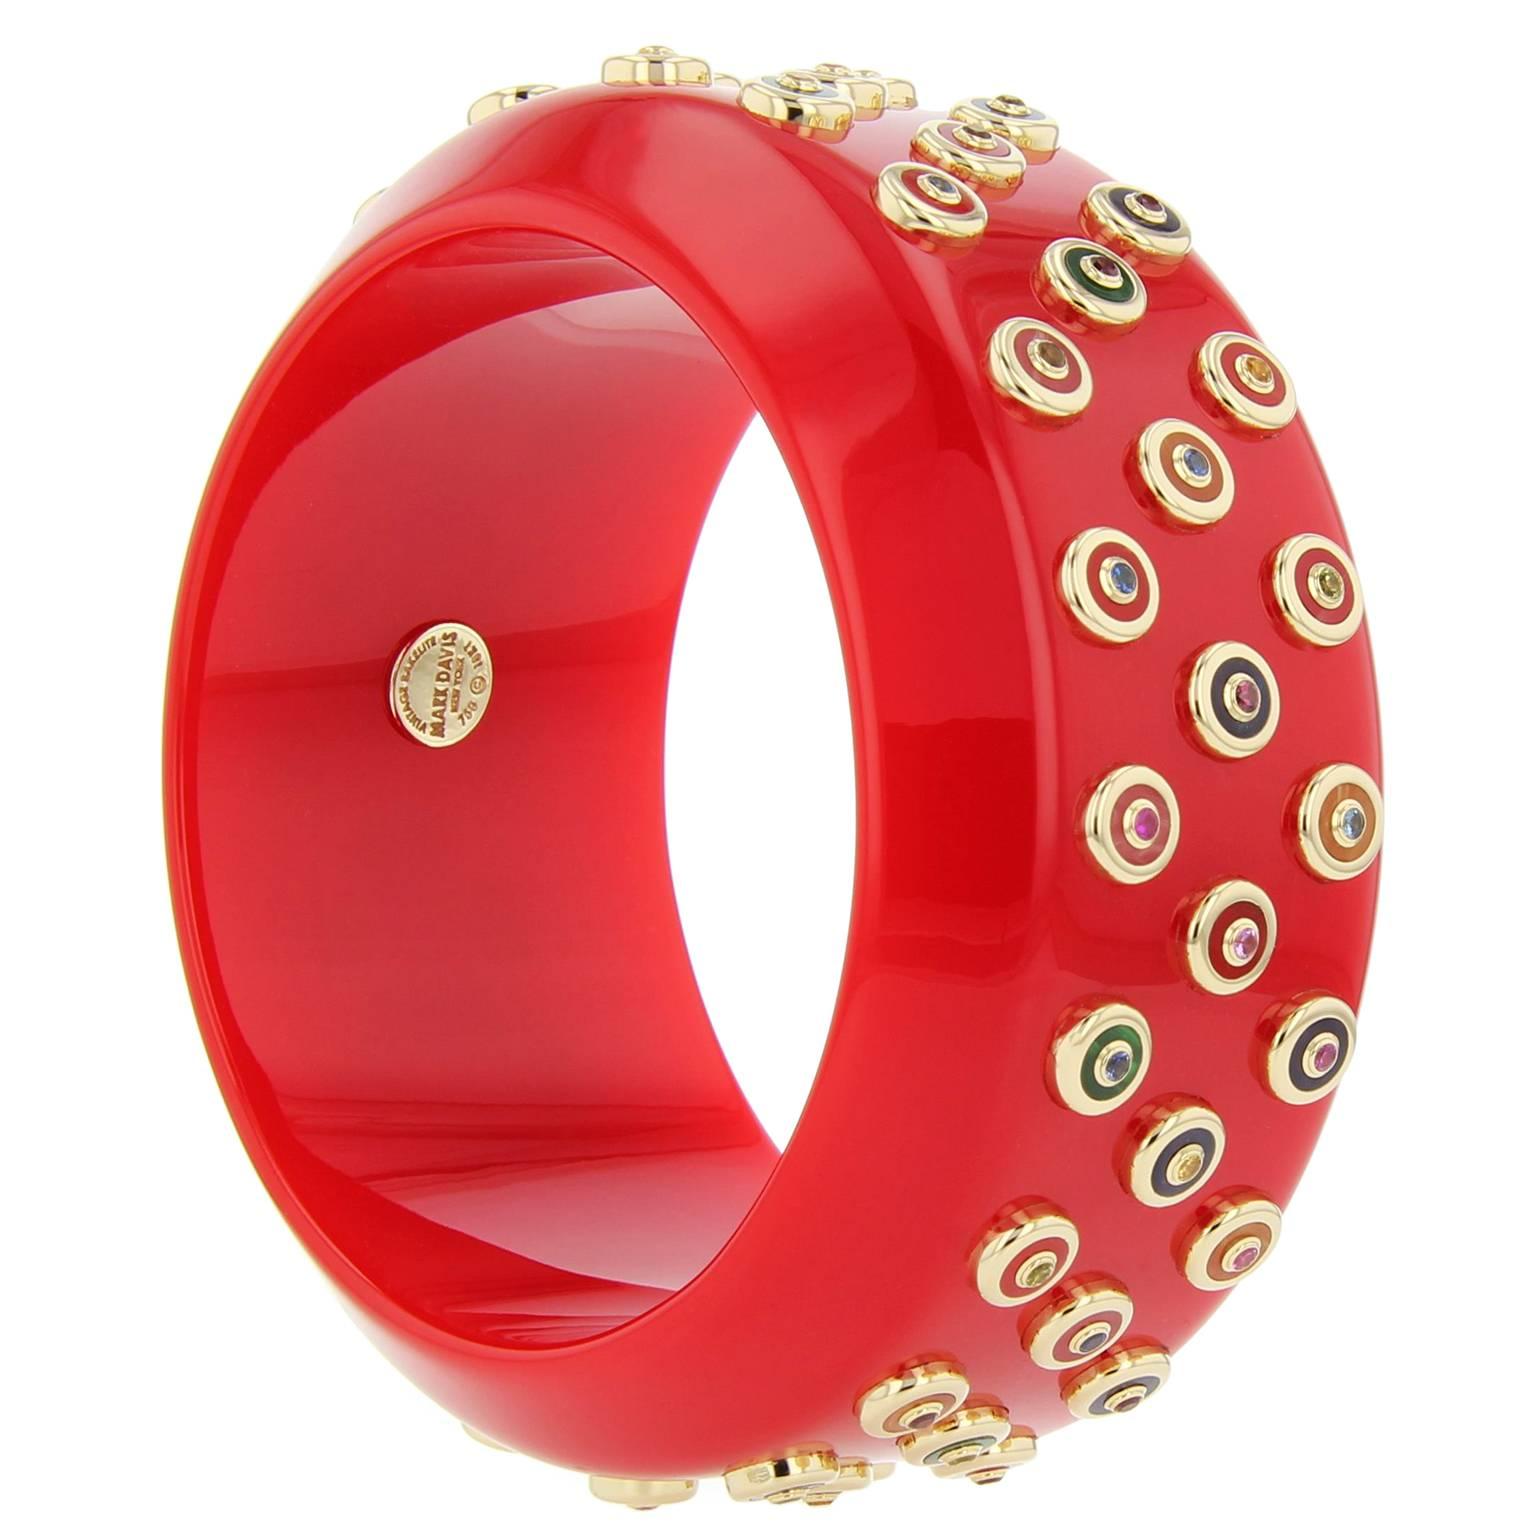 This bold and unique Mark Davis bangle was handcrafted using solid red vintage bakelite. Each 18k yellow gold stud is inlaid with various multi-colored bakelite pieces and topped with amethyst, citrine, garnet, peridot, smoky quartz or pink, yellow